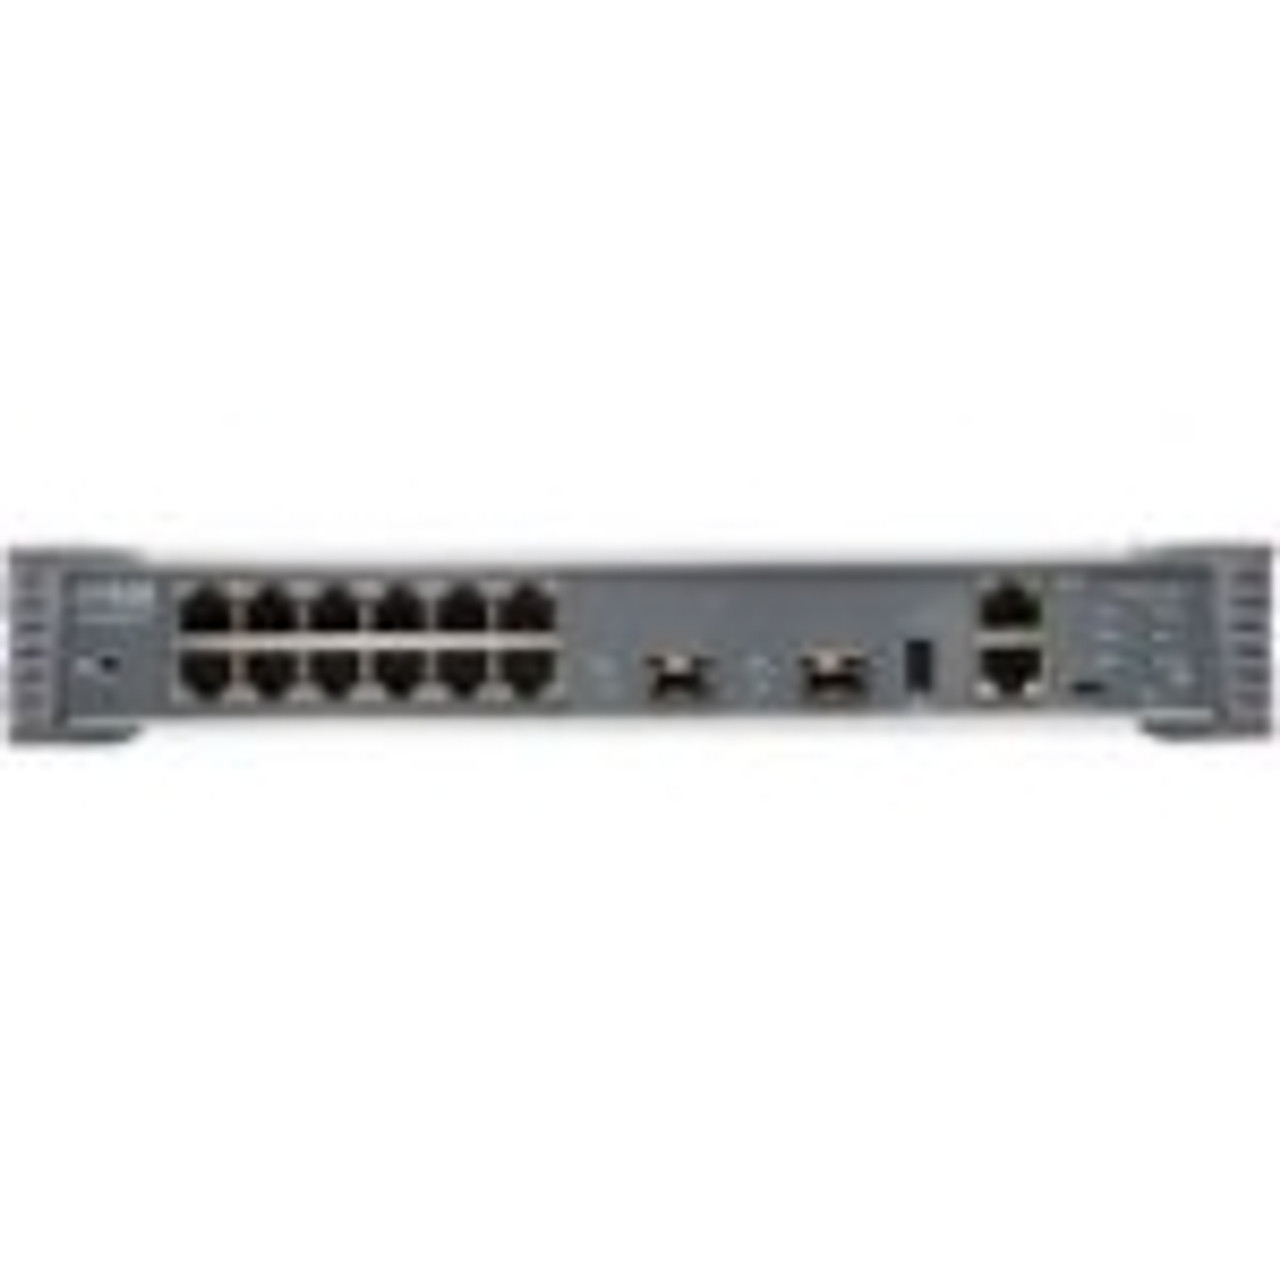 EX2300-C-12T-TAA Juniper EX2300 Taa 12-Ports 10/100/1000Base-T Gigabit Ethernet Layer3 managed Switch with 2x 10Gbps SFP Ports (Refurbished)